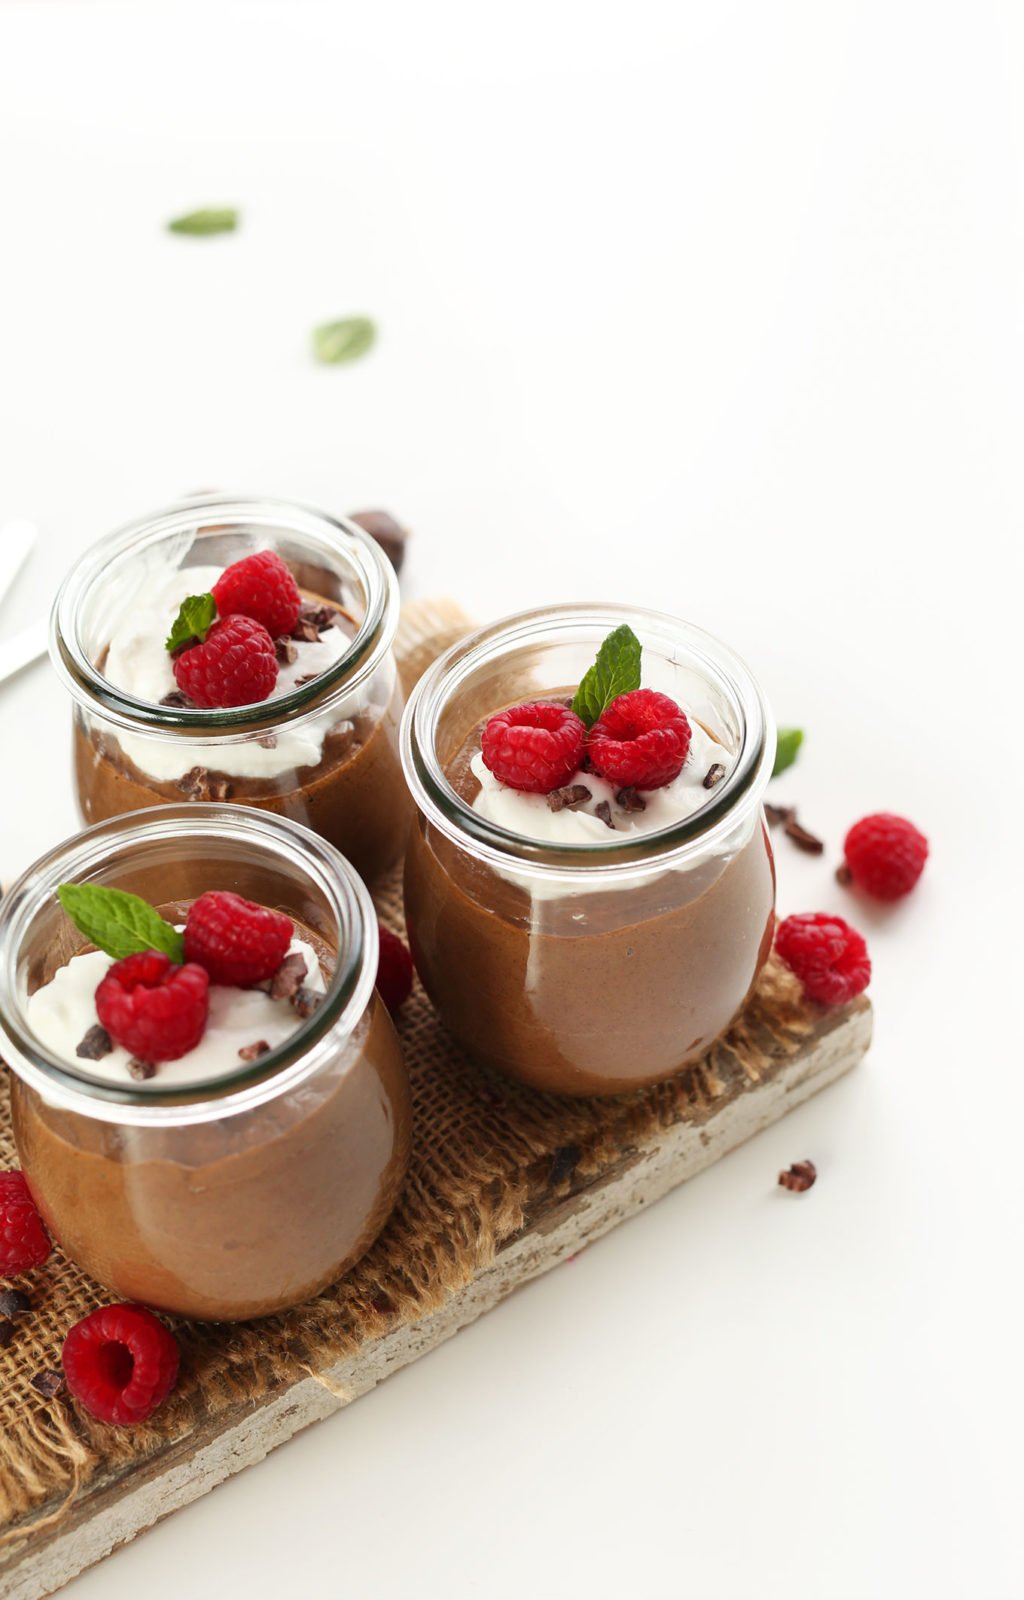 EASY-6-ingredient-Chia-Seed-Pudding-thats-creamy-rich-and-naturally-sweetened-vegan-glutenfree-chocolate